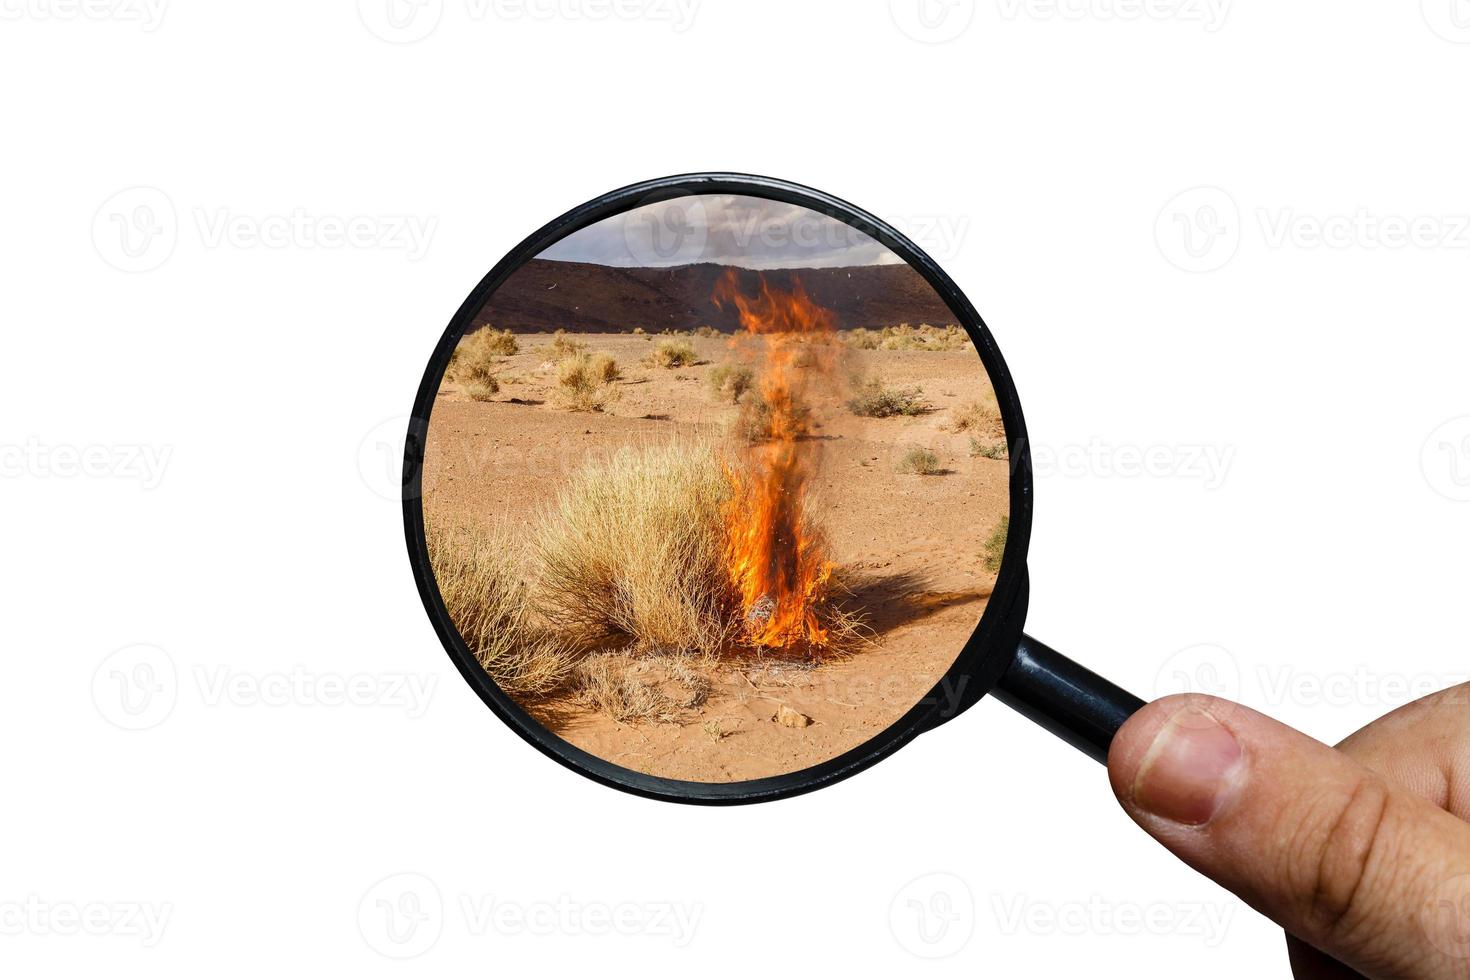 dry burning grass in the Sahara desert, view through a magnifying glass on a white background, magnifying glass in hand. photo